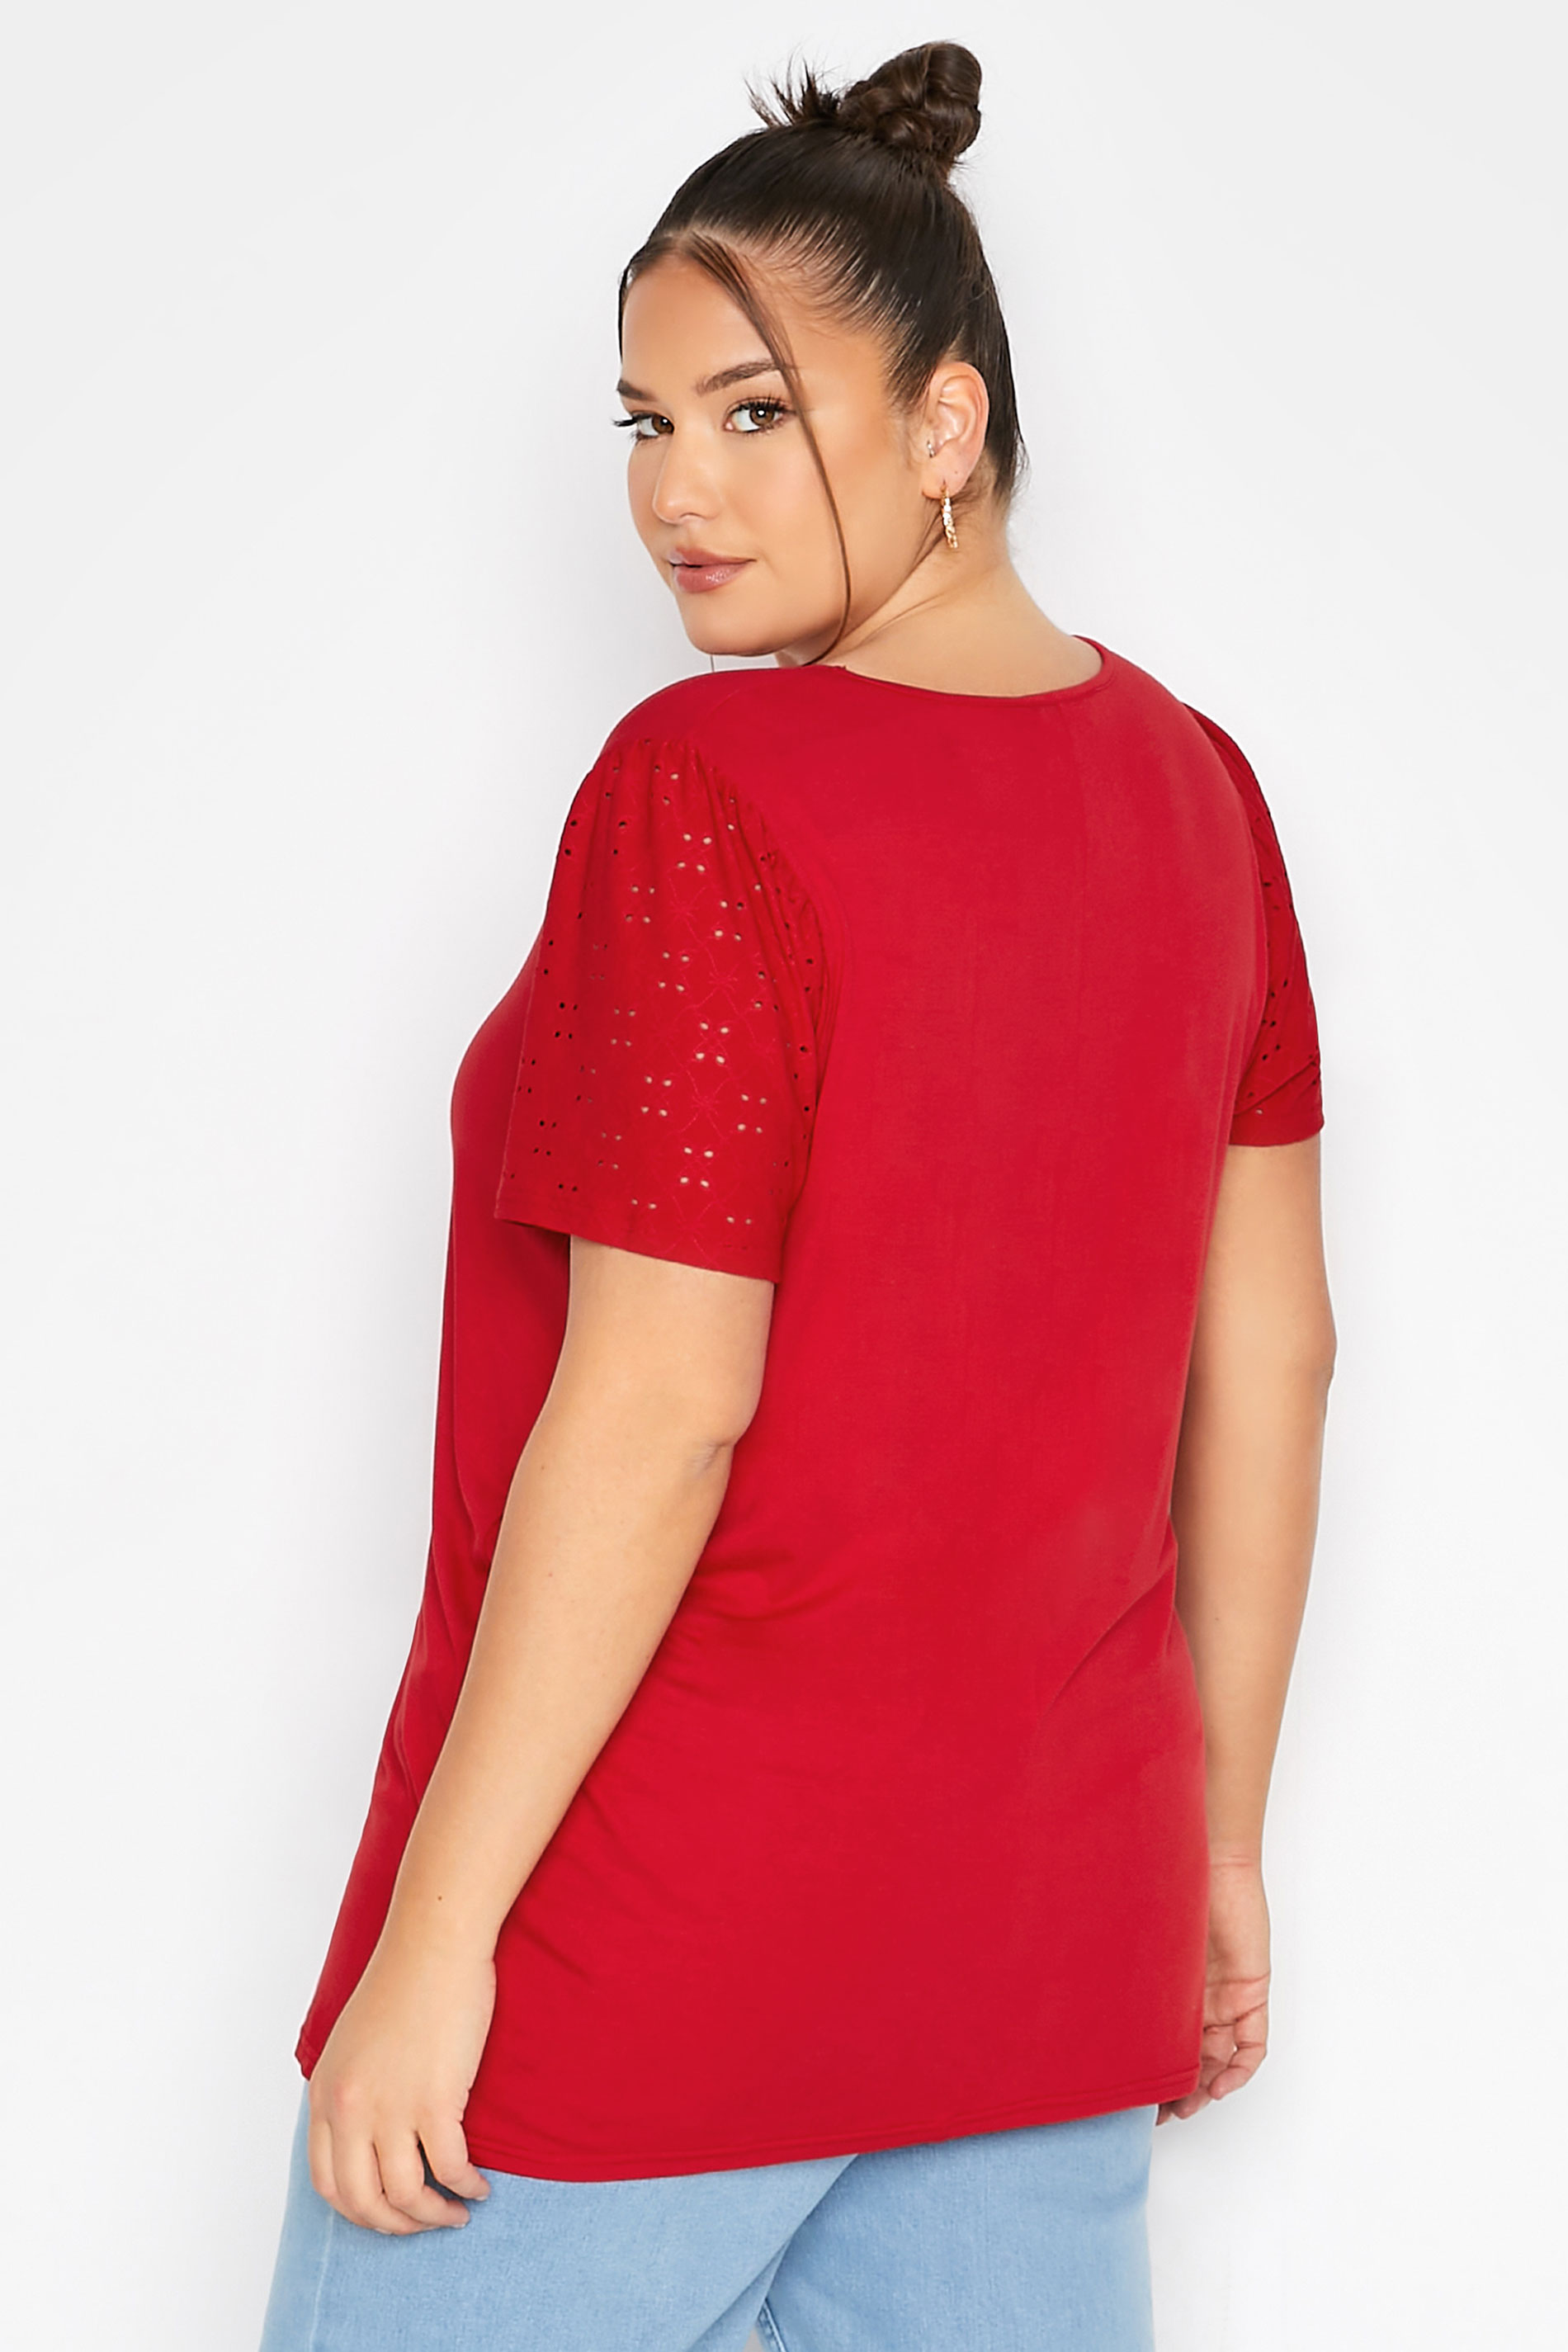 Grande taille  Tops Grande taille  T-Shirts | LIMITED COLLECTION - T-Shirt Rouge Manches Broderie Anglaise - MN85886